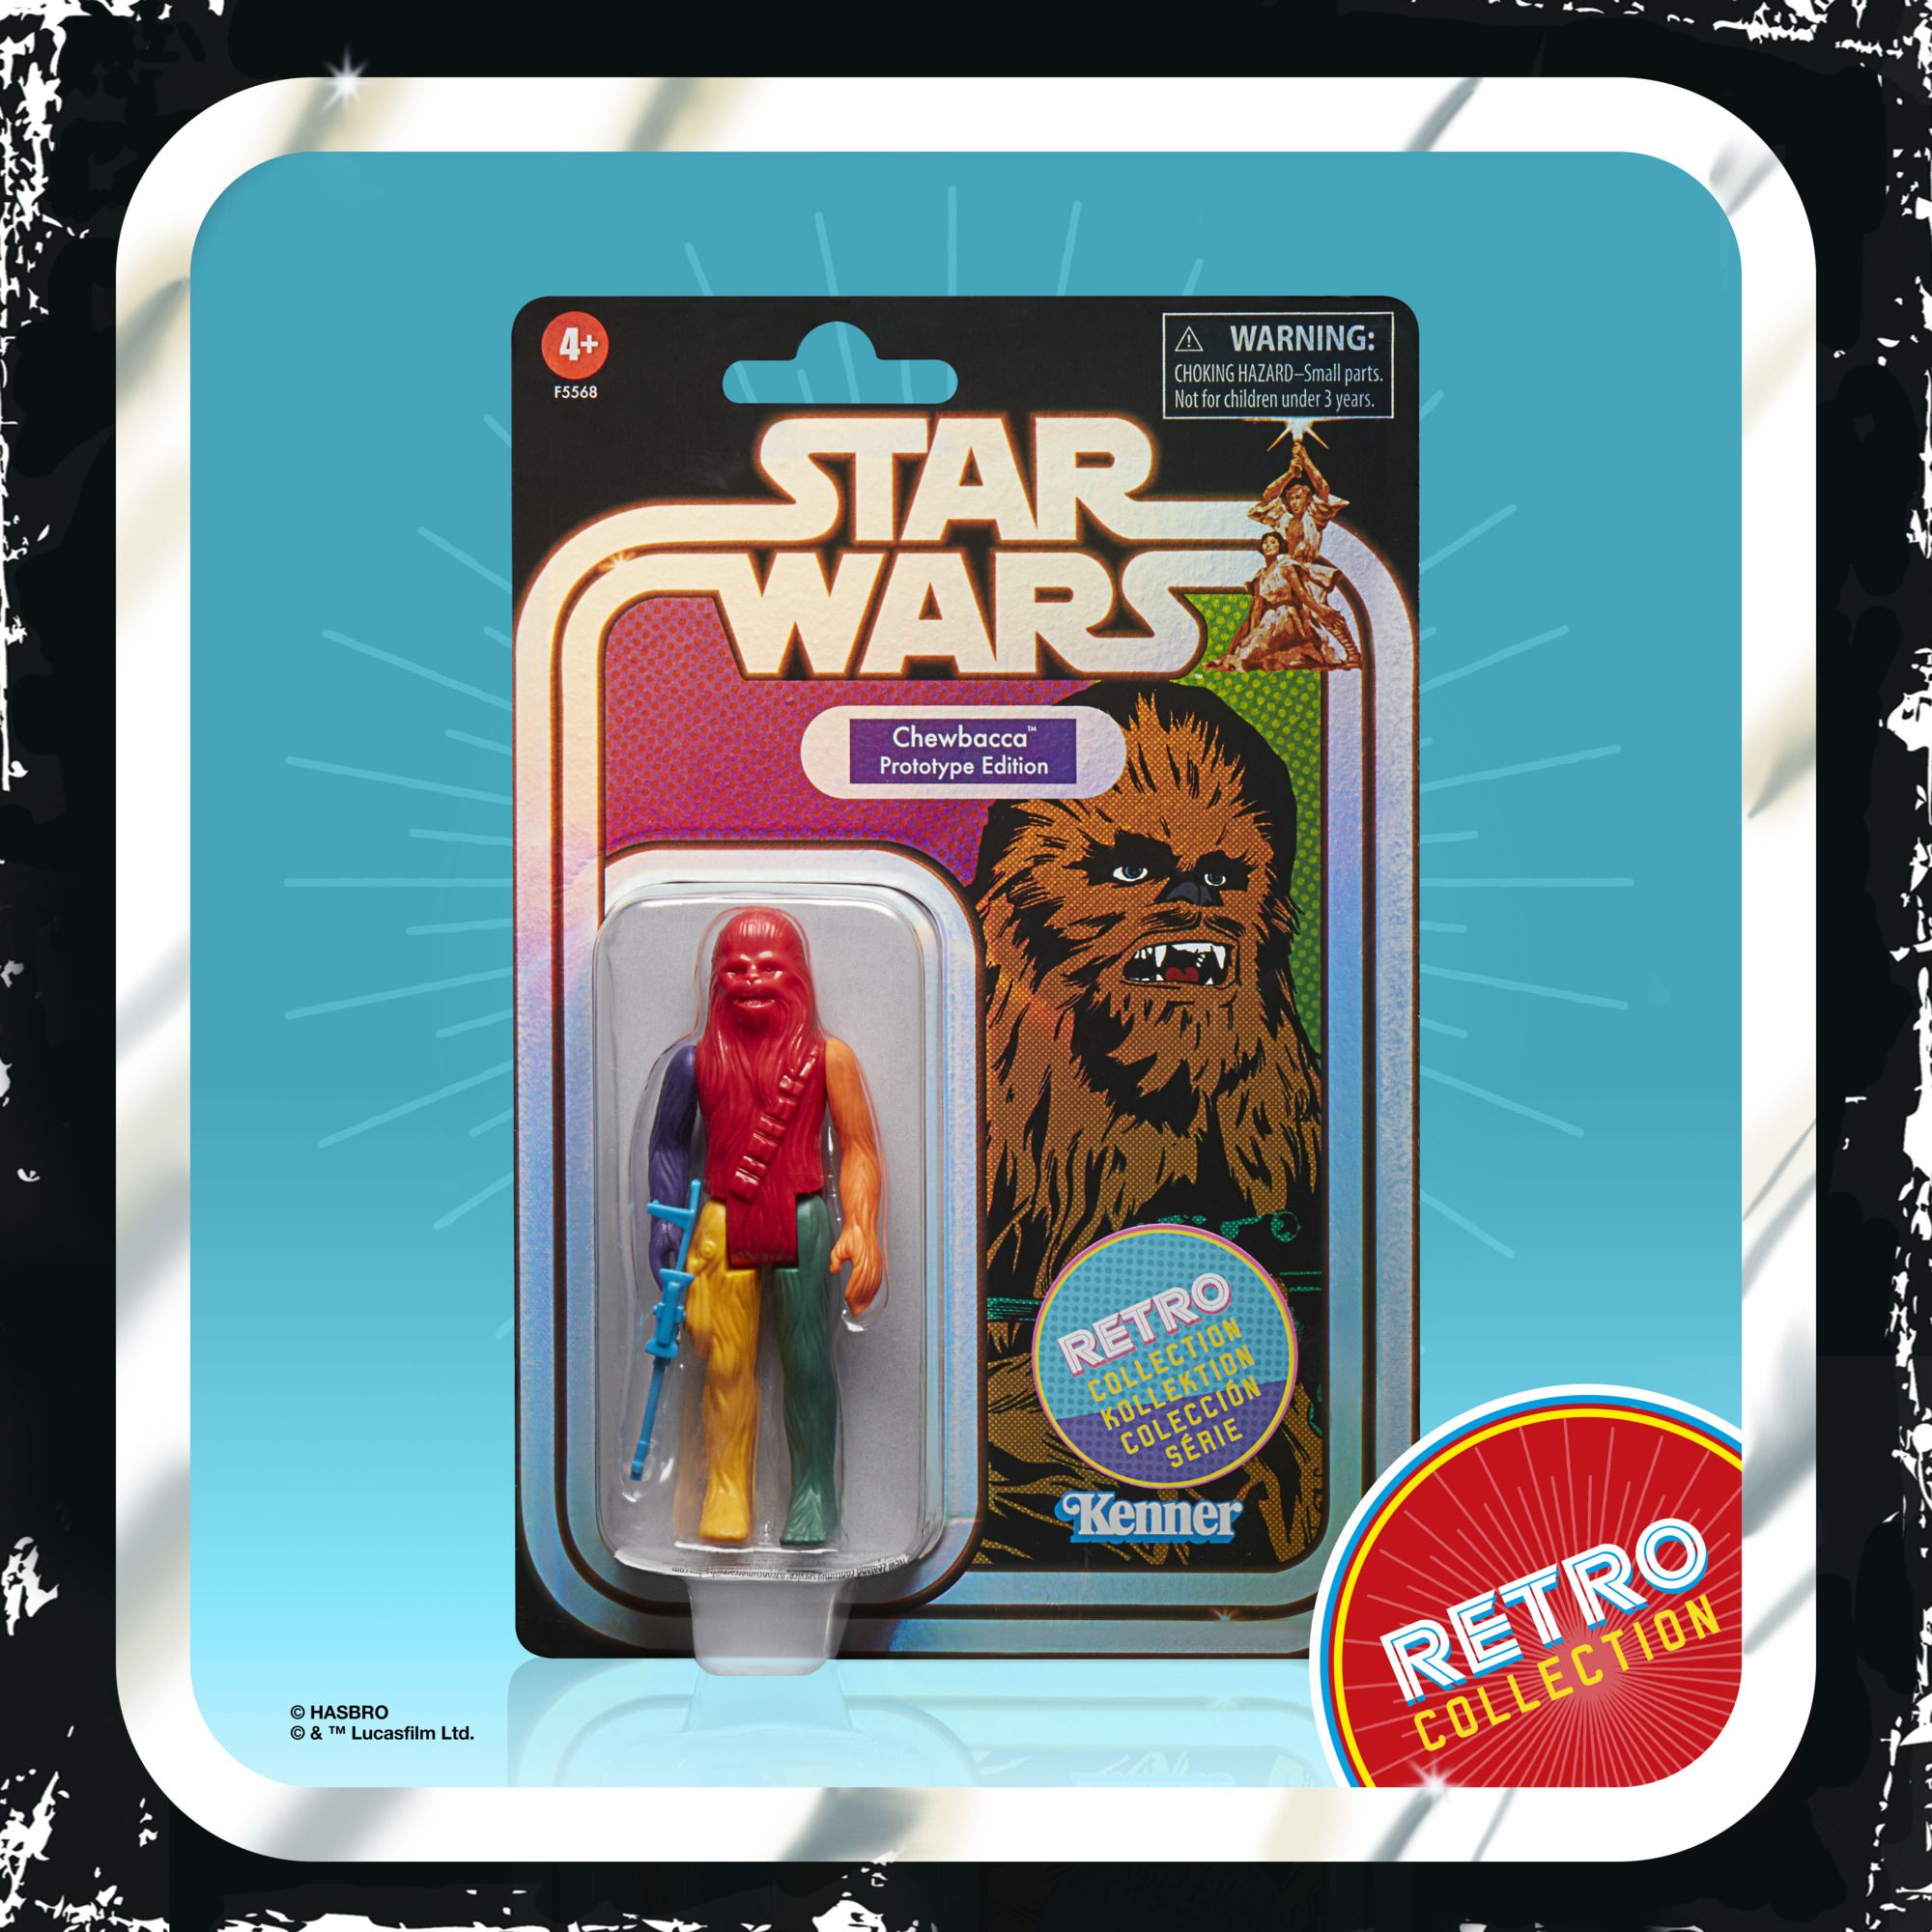 STAR WARS RETRO COLLECTION 3.75-INCH CHEWBACCA PROTOTYPE EDITION Figure (Package)